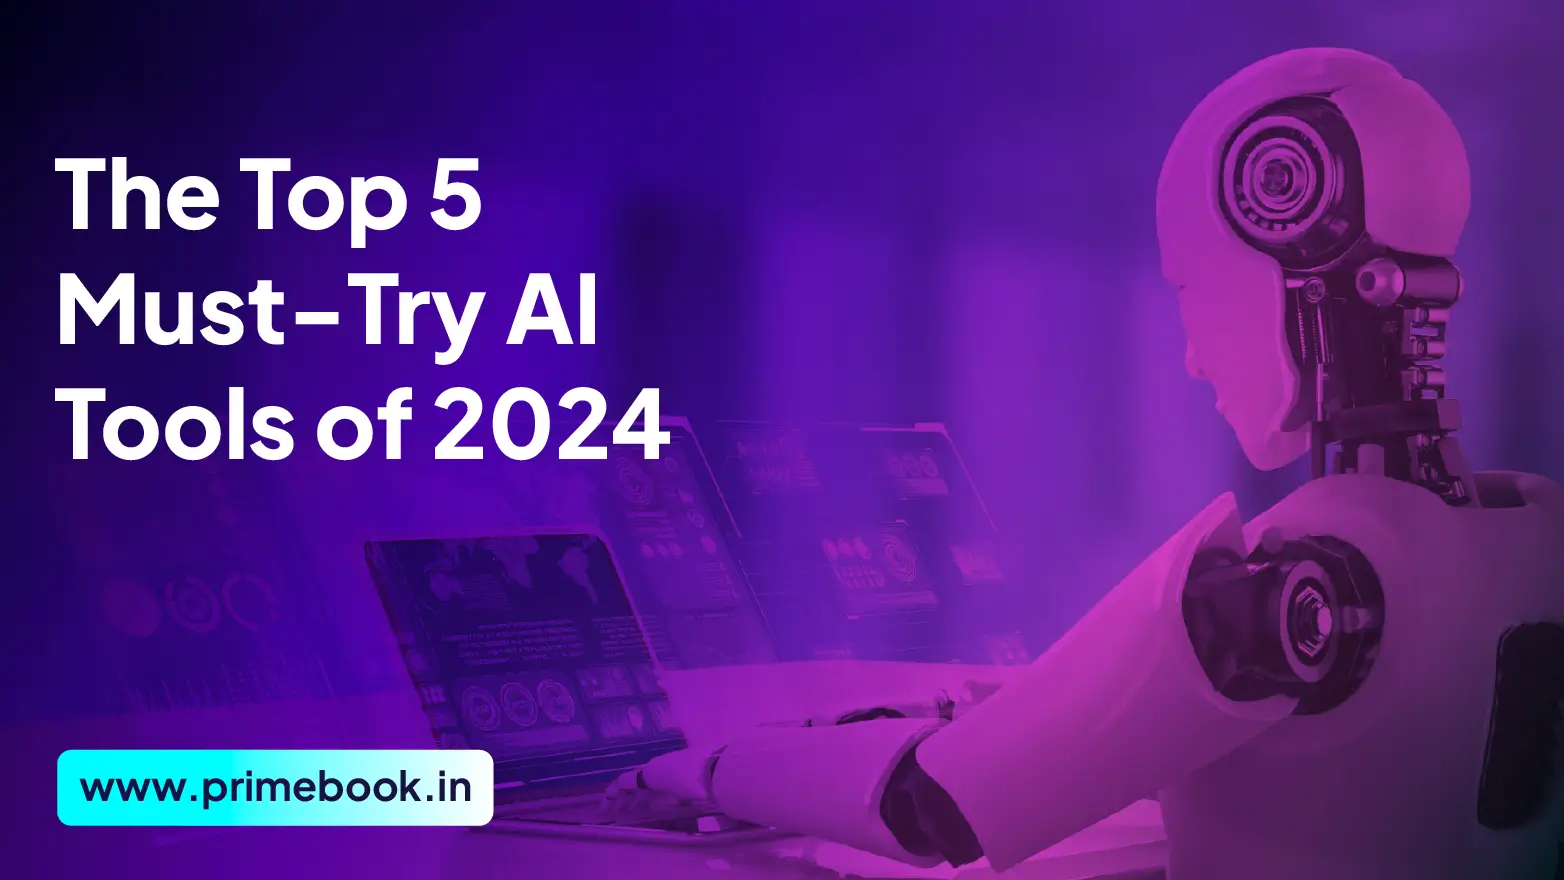 Top 5 Must-Try Artificial Intelligence (AI) Tools of 2024